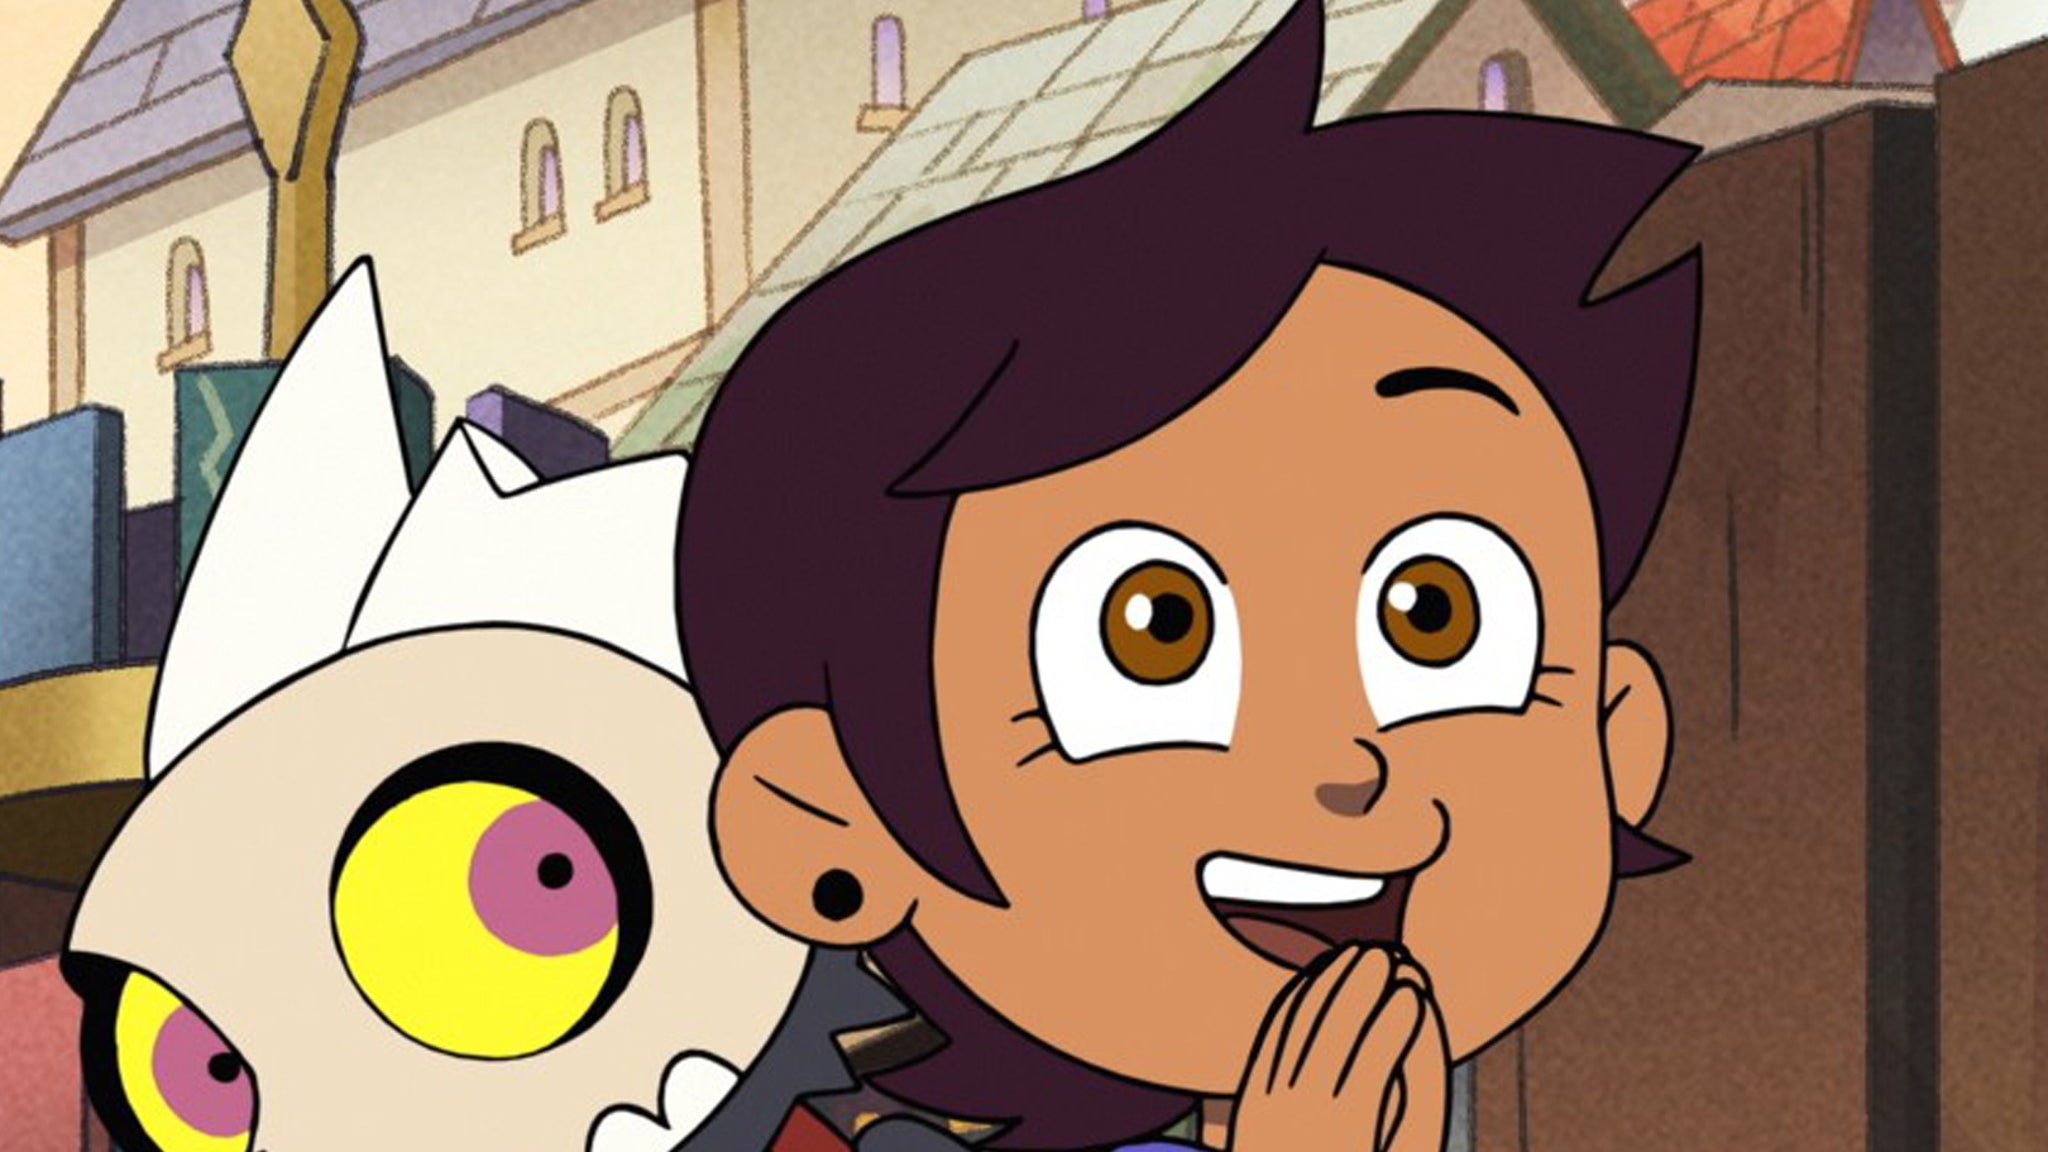 Disney Might Have Their First LGBTQ+ Lead Character in 'The Owl House